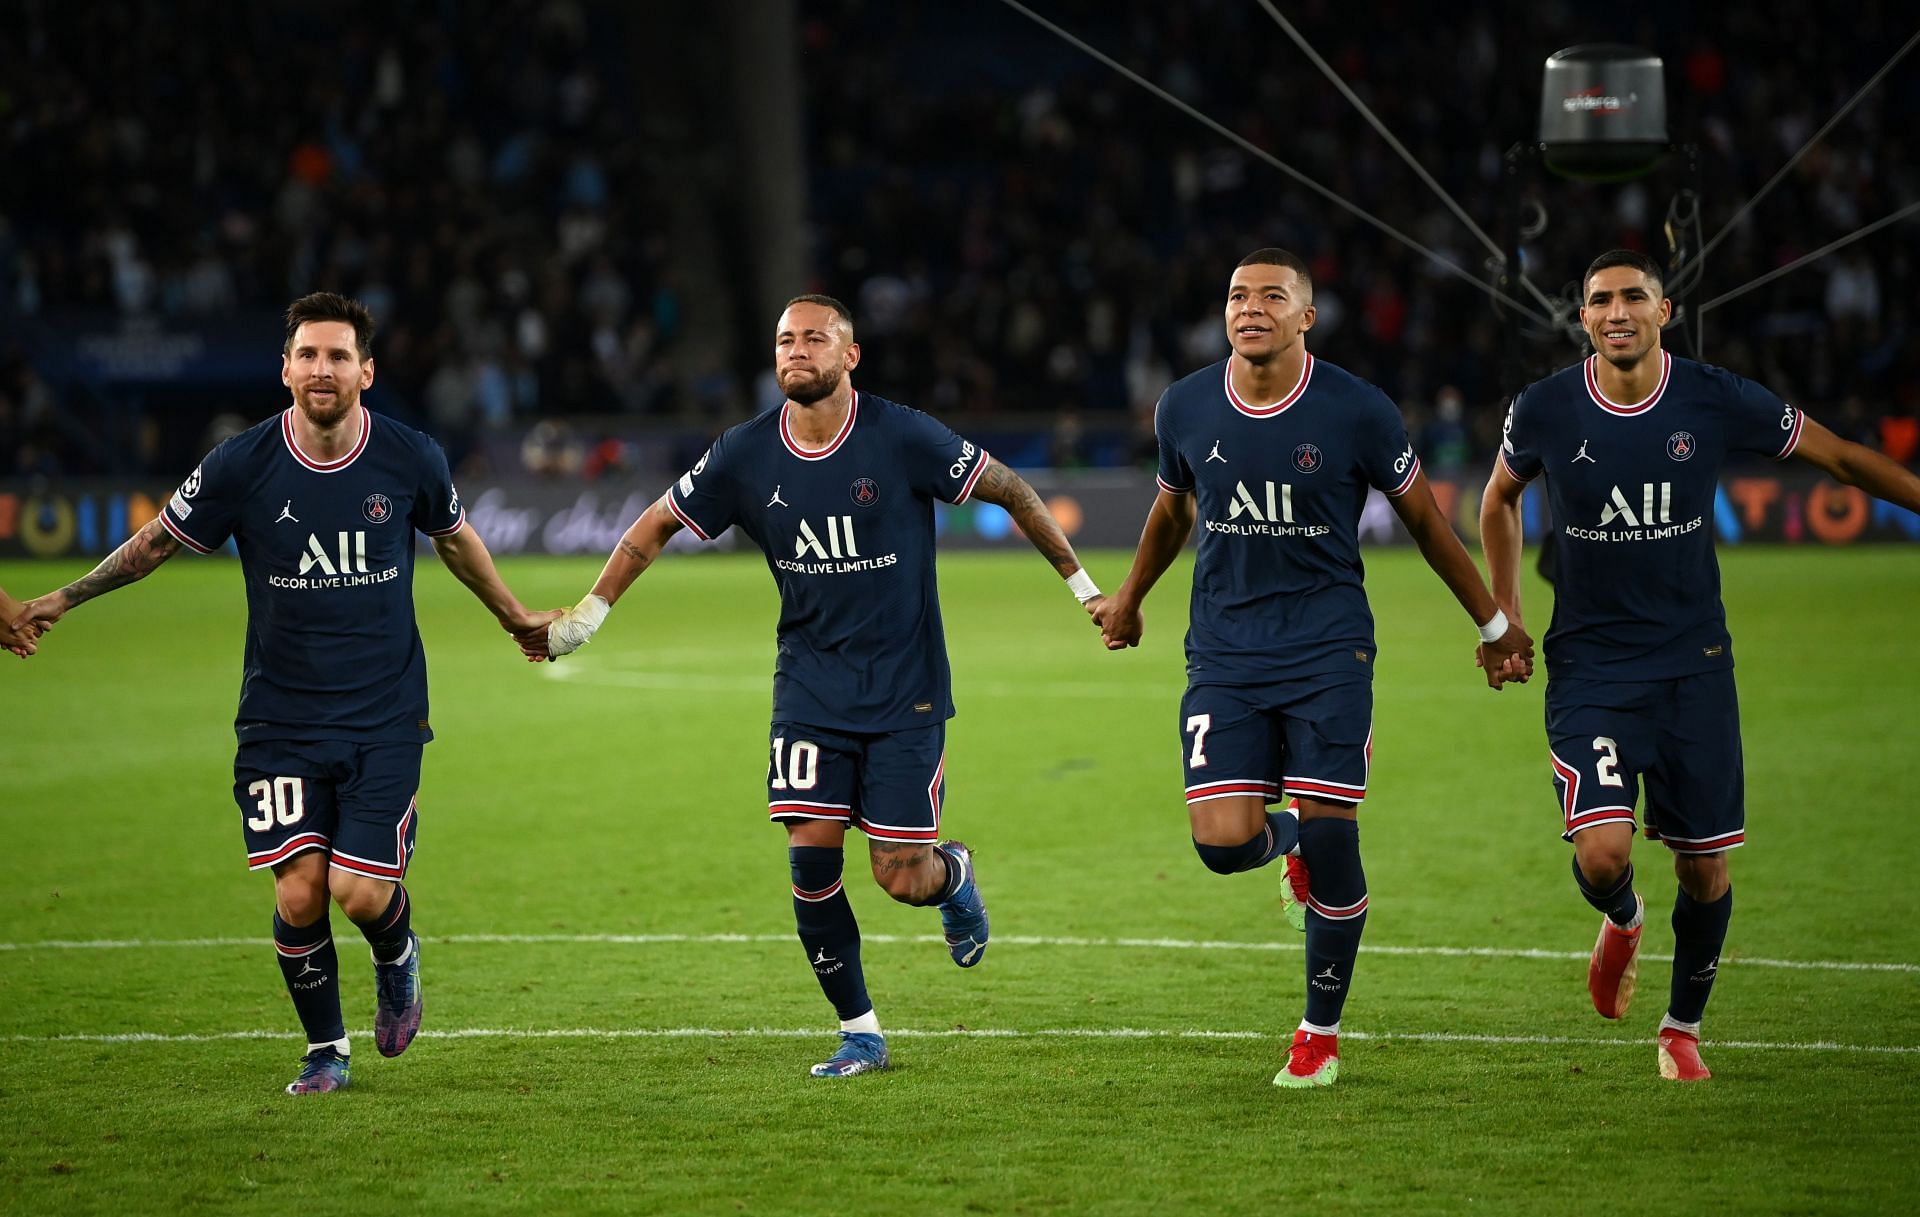 PSG have impressive players at their disposal